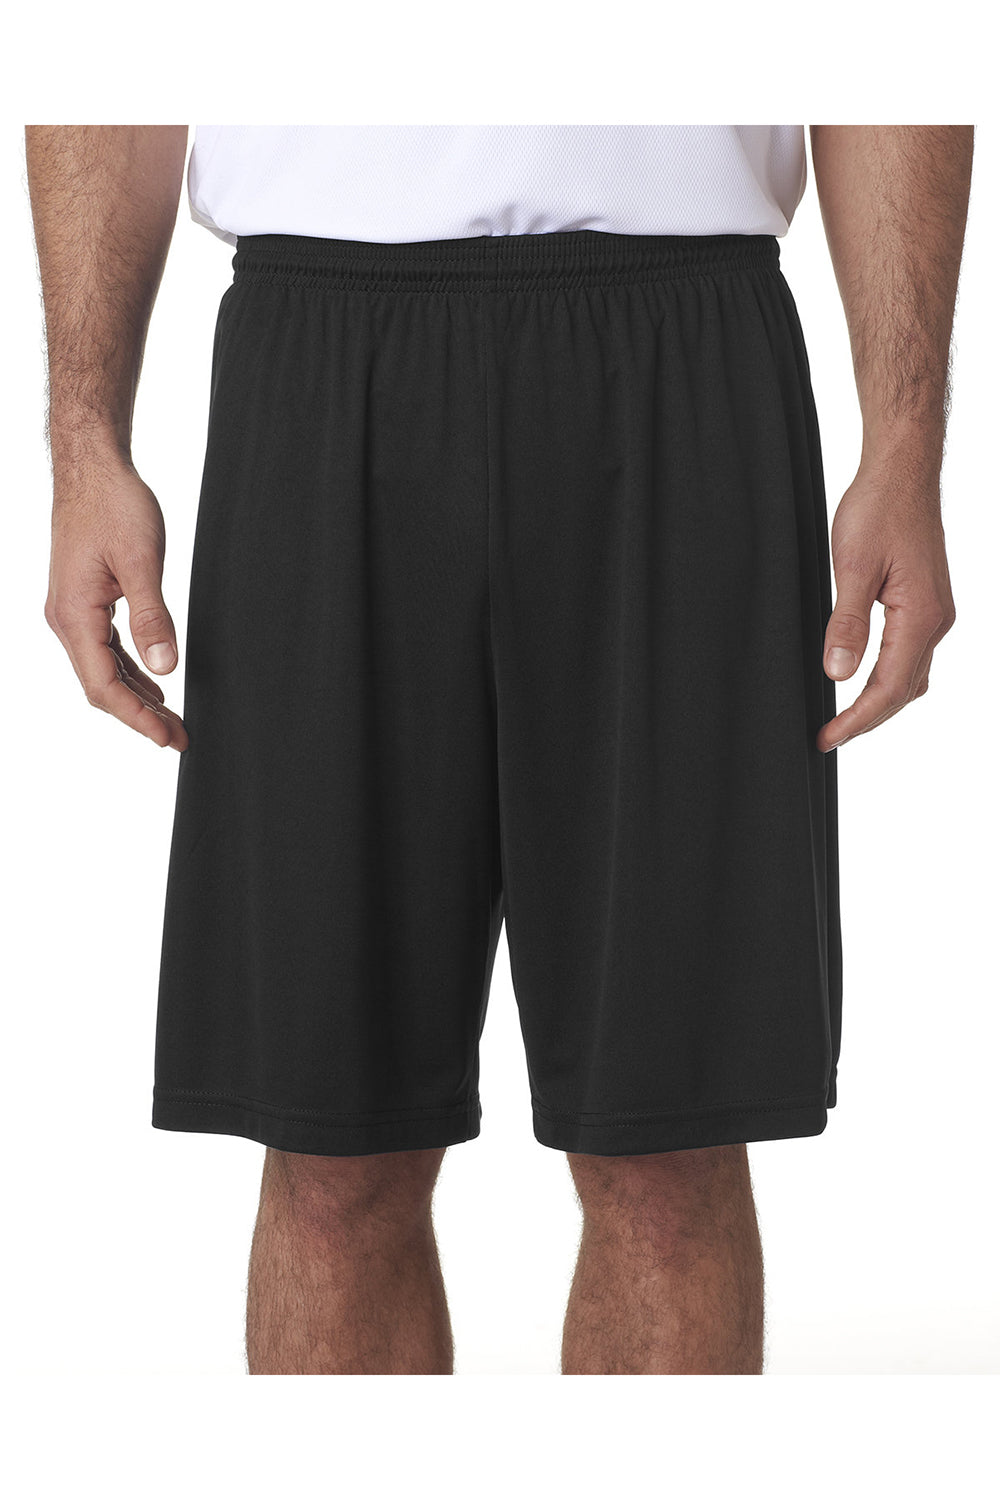 A4 N5283 Mens Moisture Wicking Performance Shorts Black Model Front